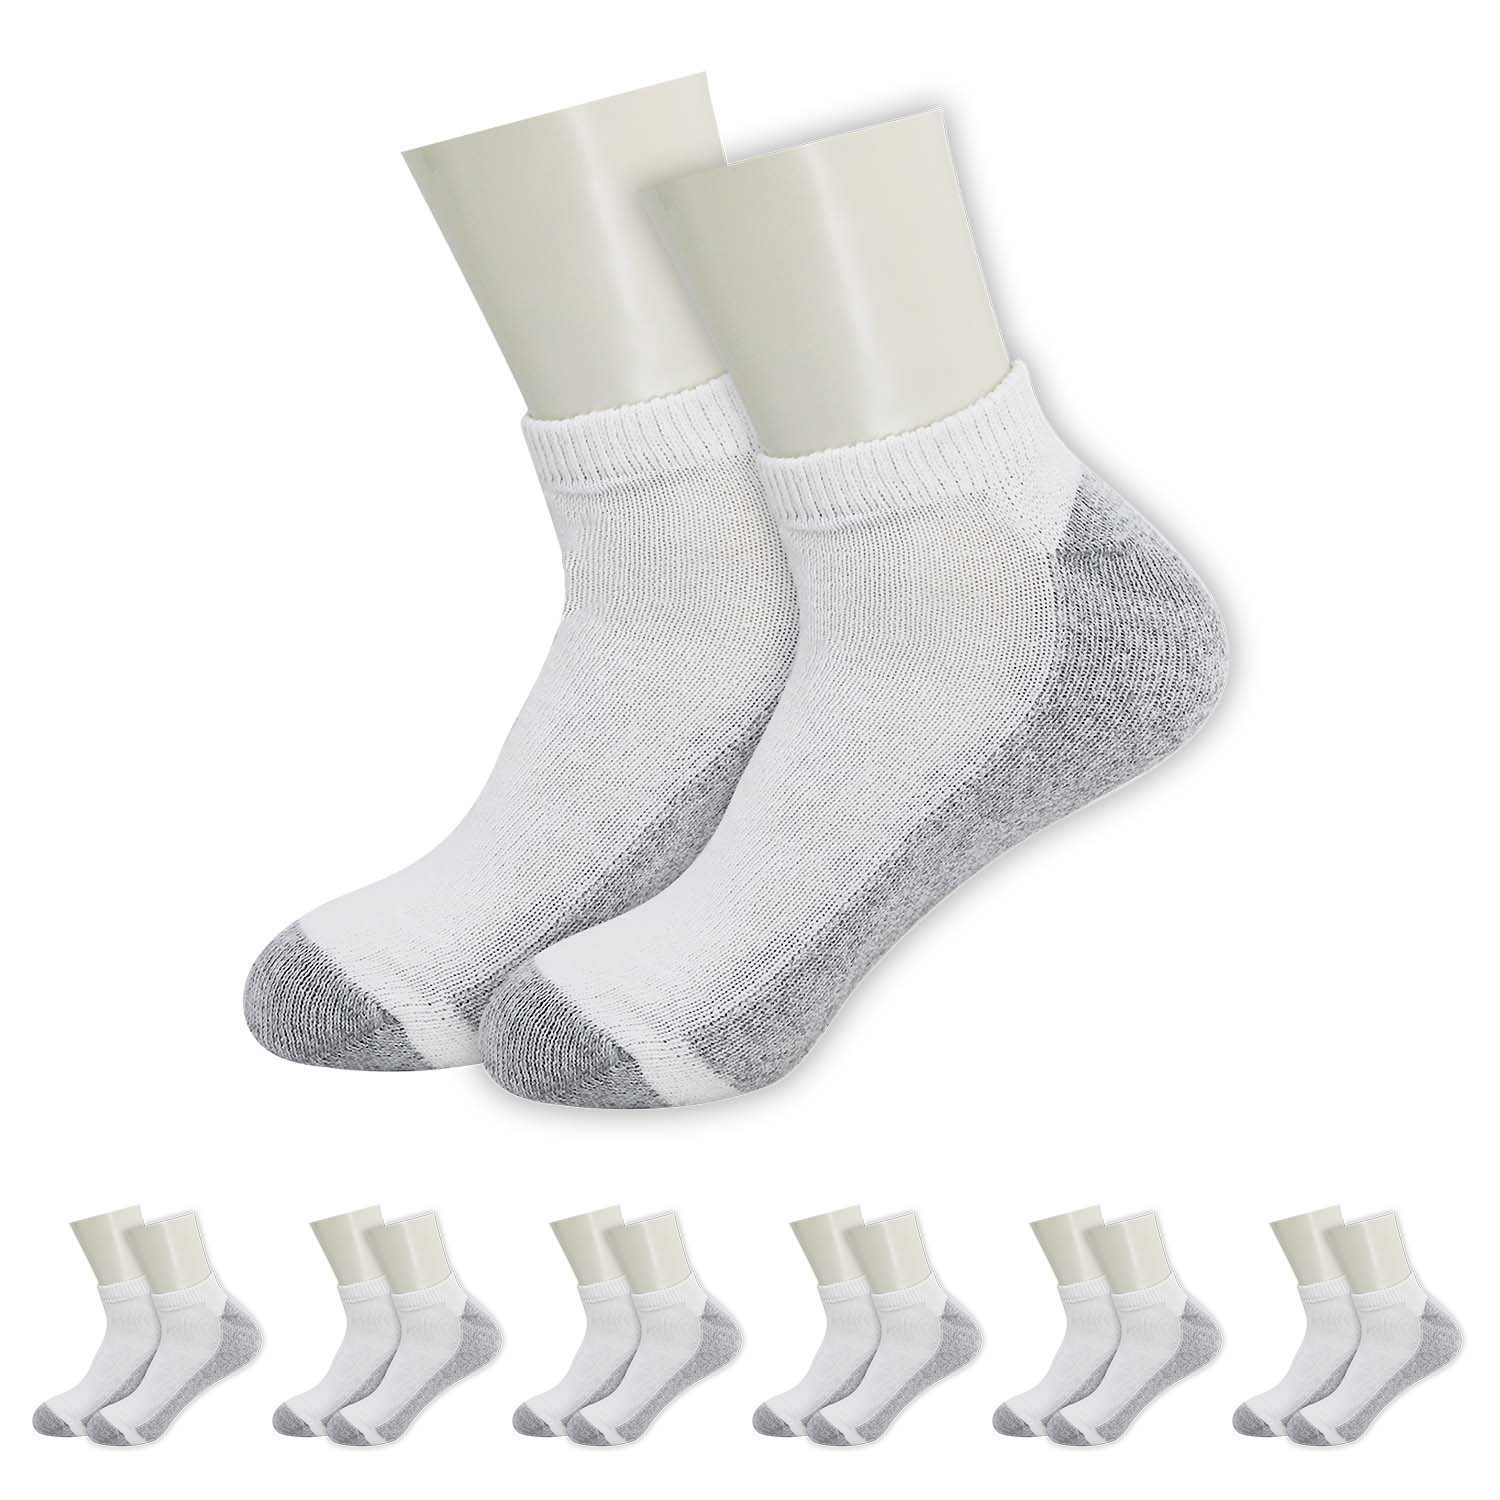 180 Pairs - Low Cut Bulk Socks Athletic Size 10-13 in White with